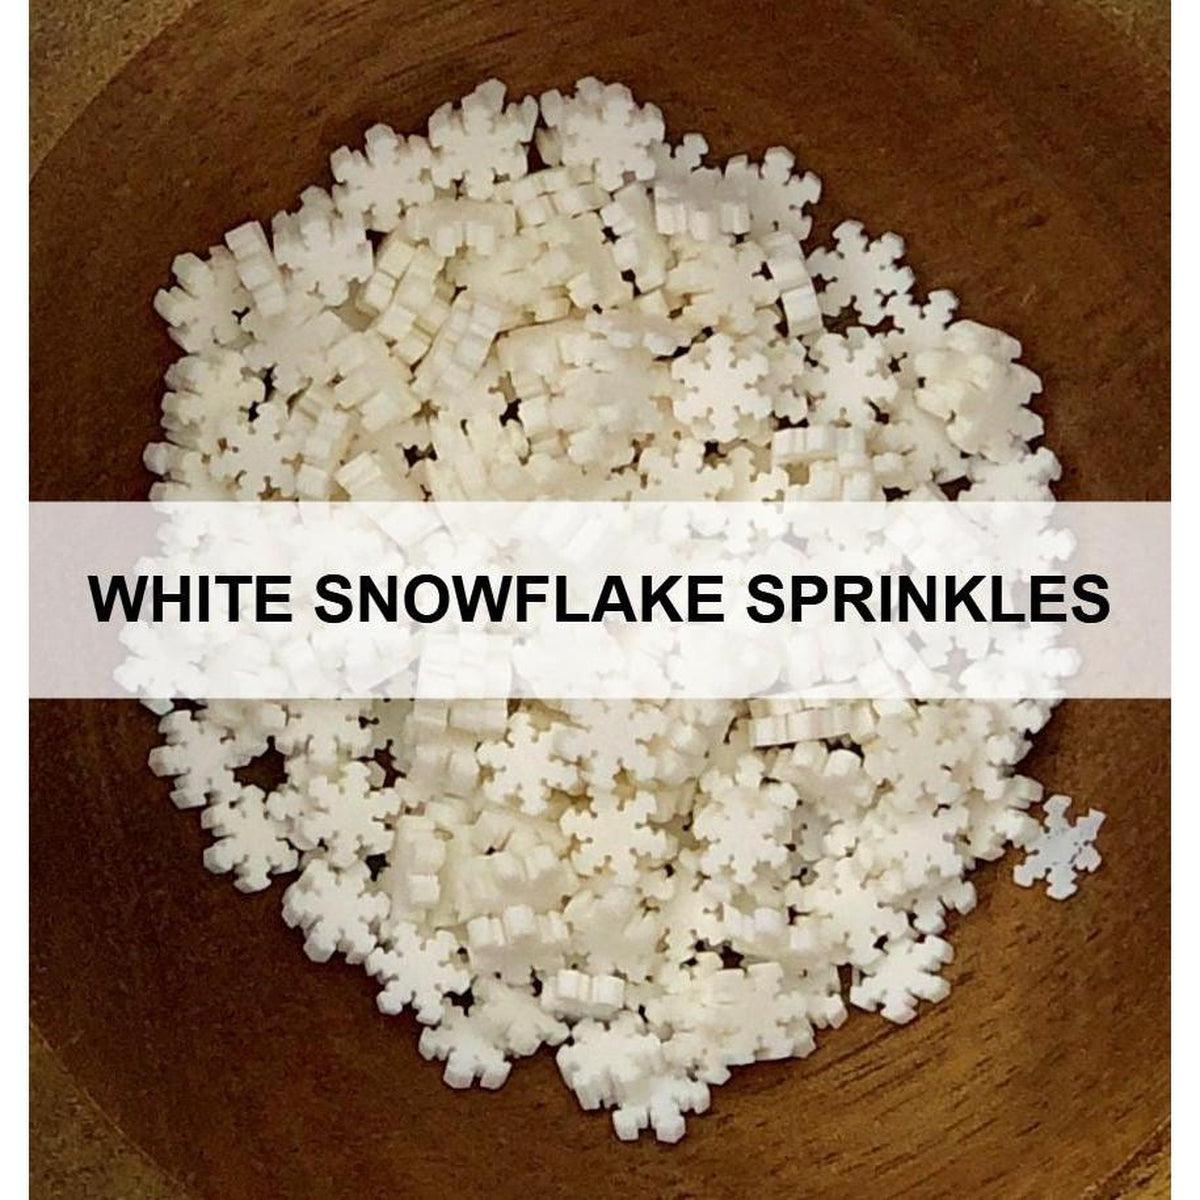 White Snowflake Sprinkles by Kat Scrappiness - Kat Scrappiness